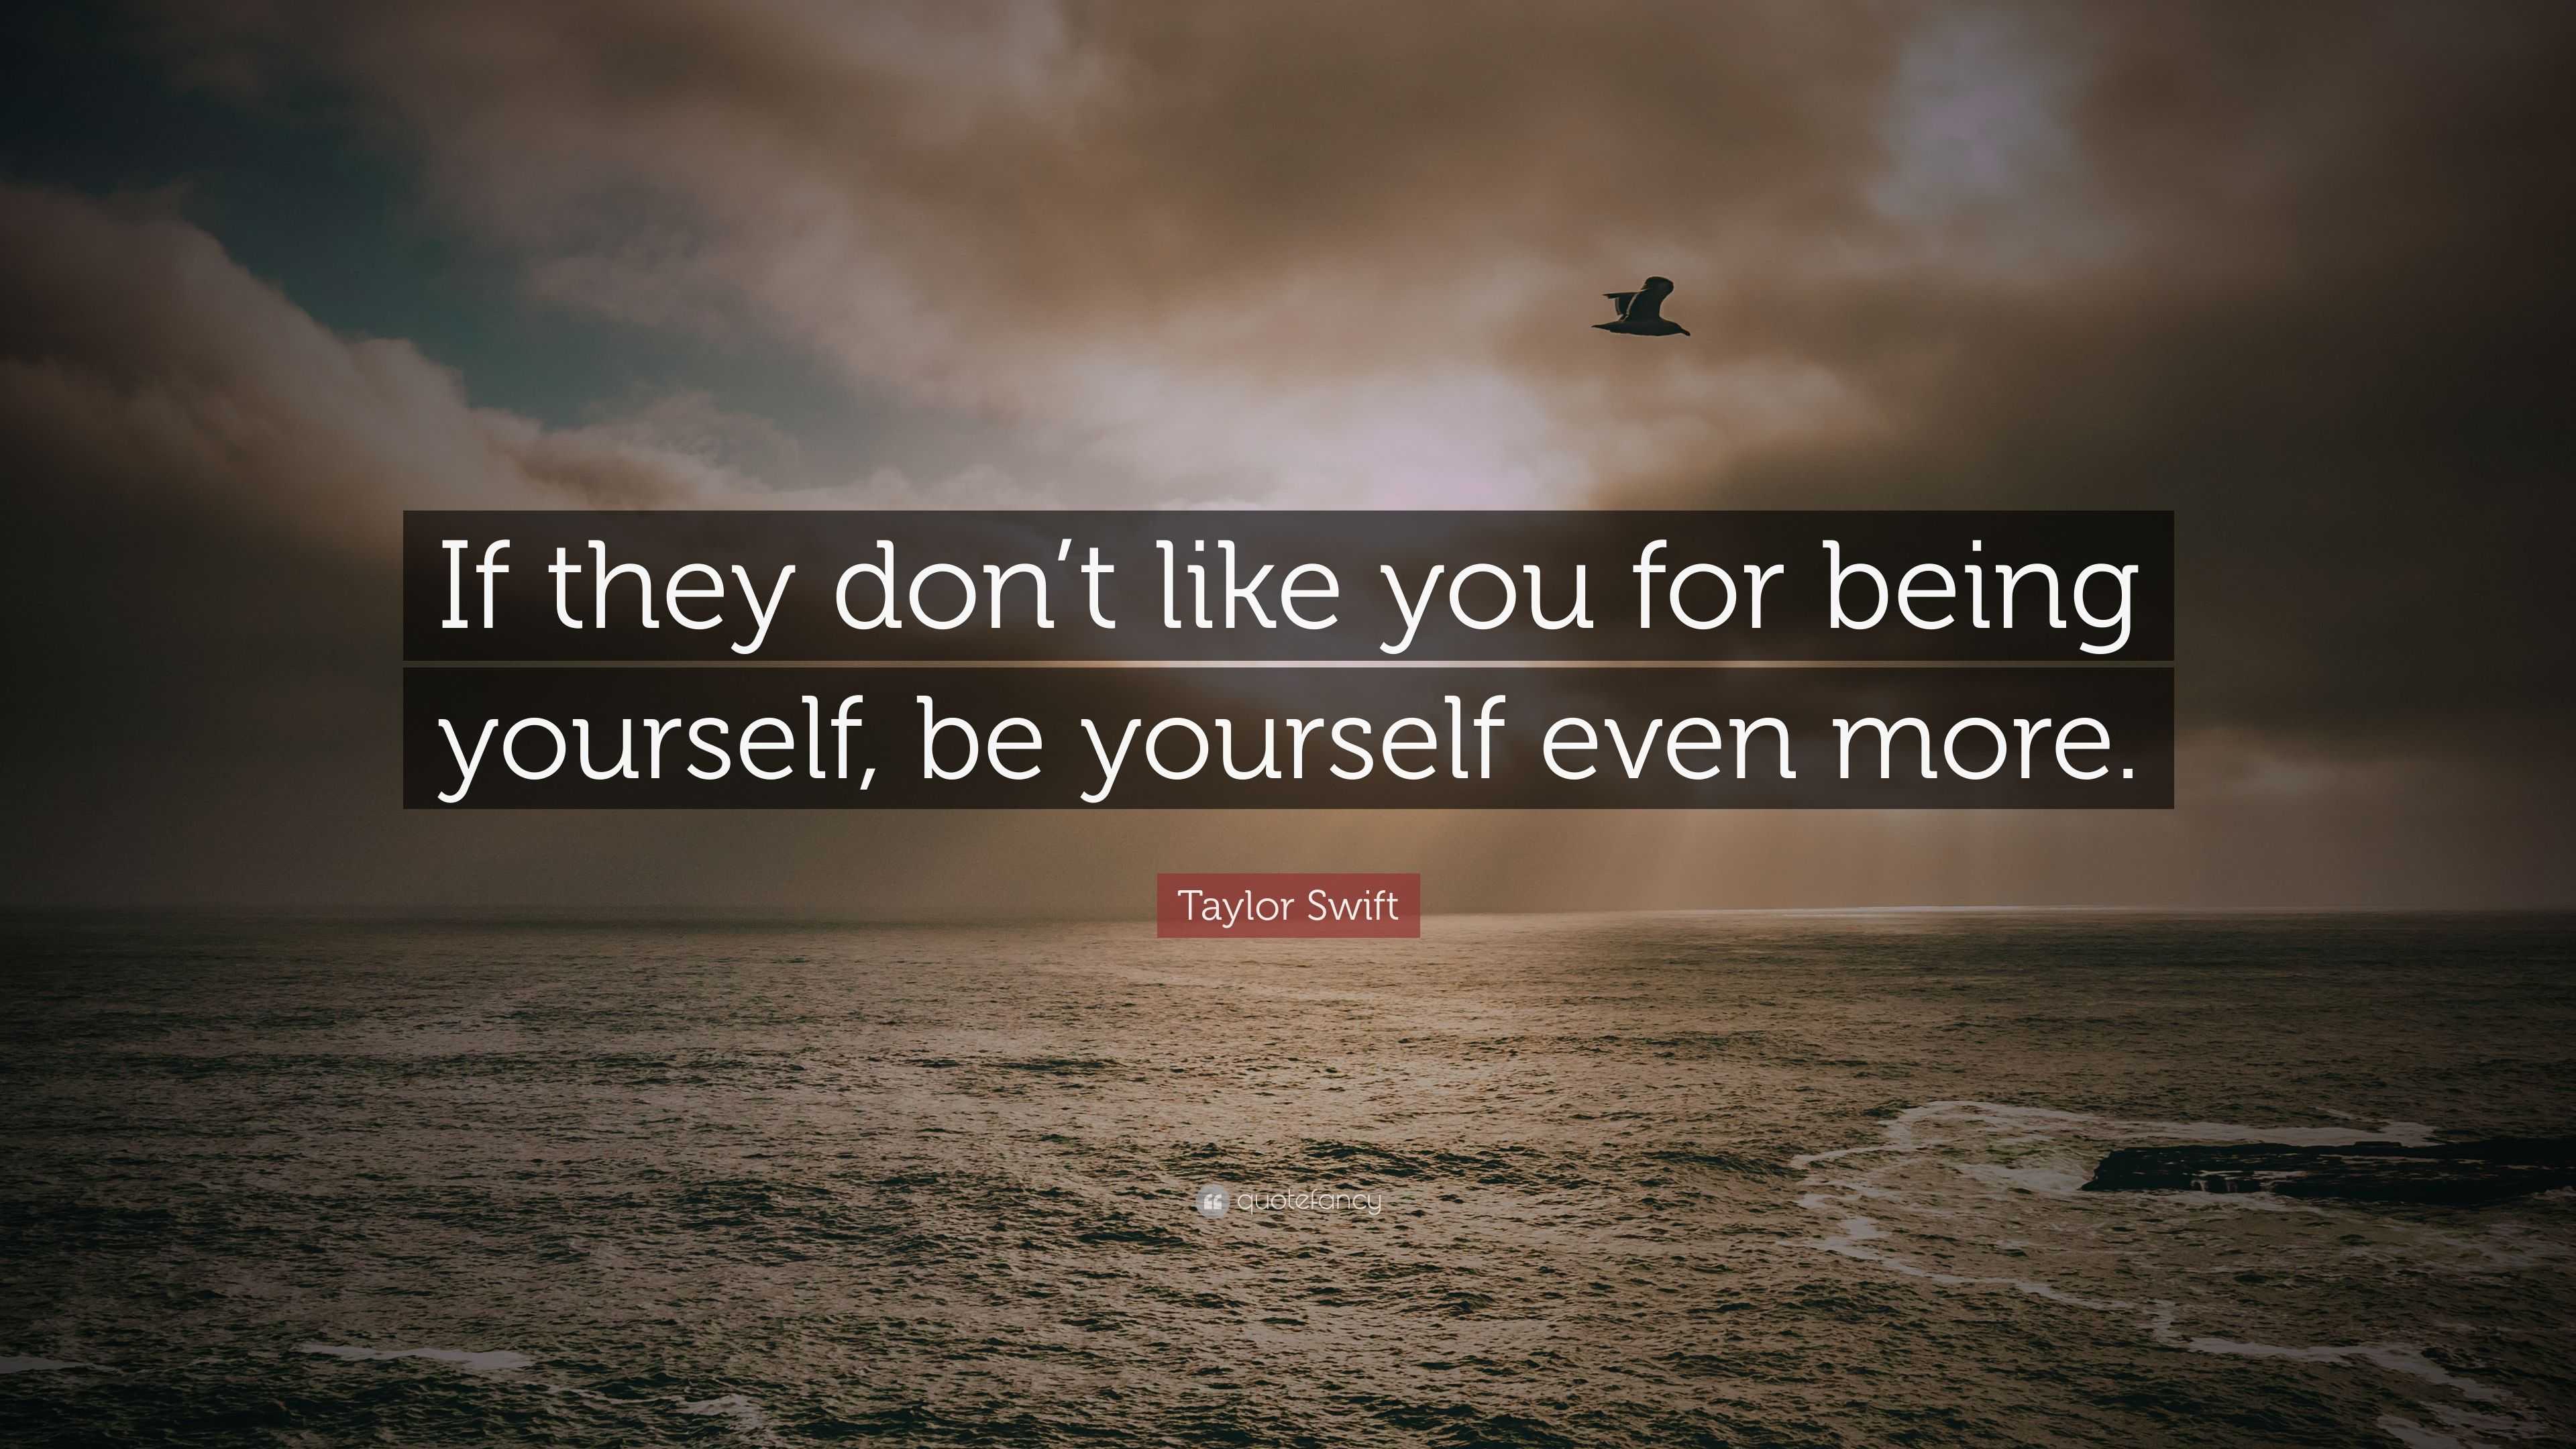 Taylor Swift Quote: "If they don't like you for being yourself, be yourself even more." (12 ...